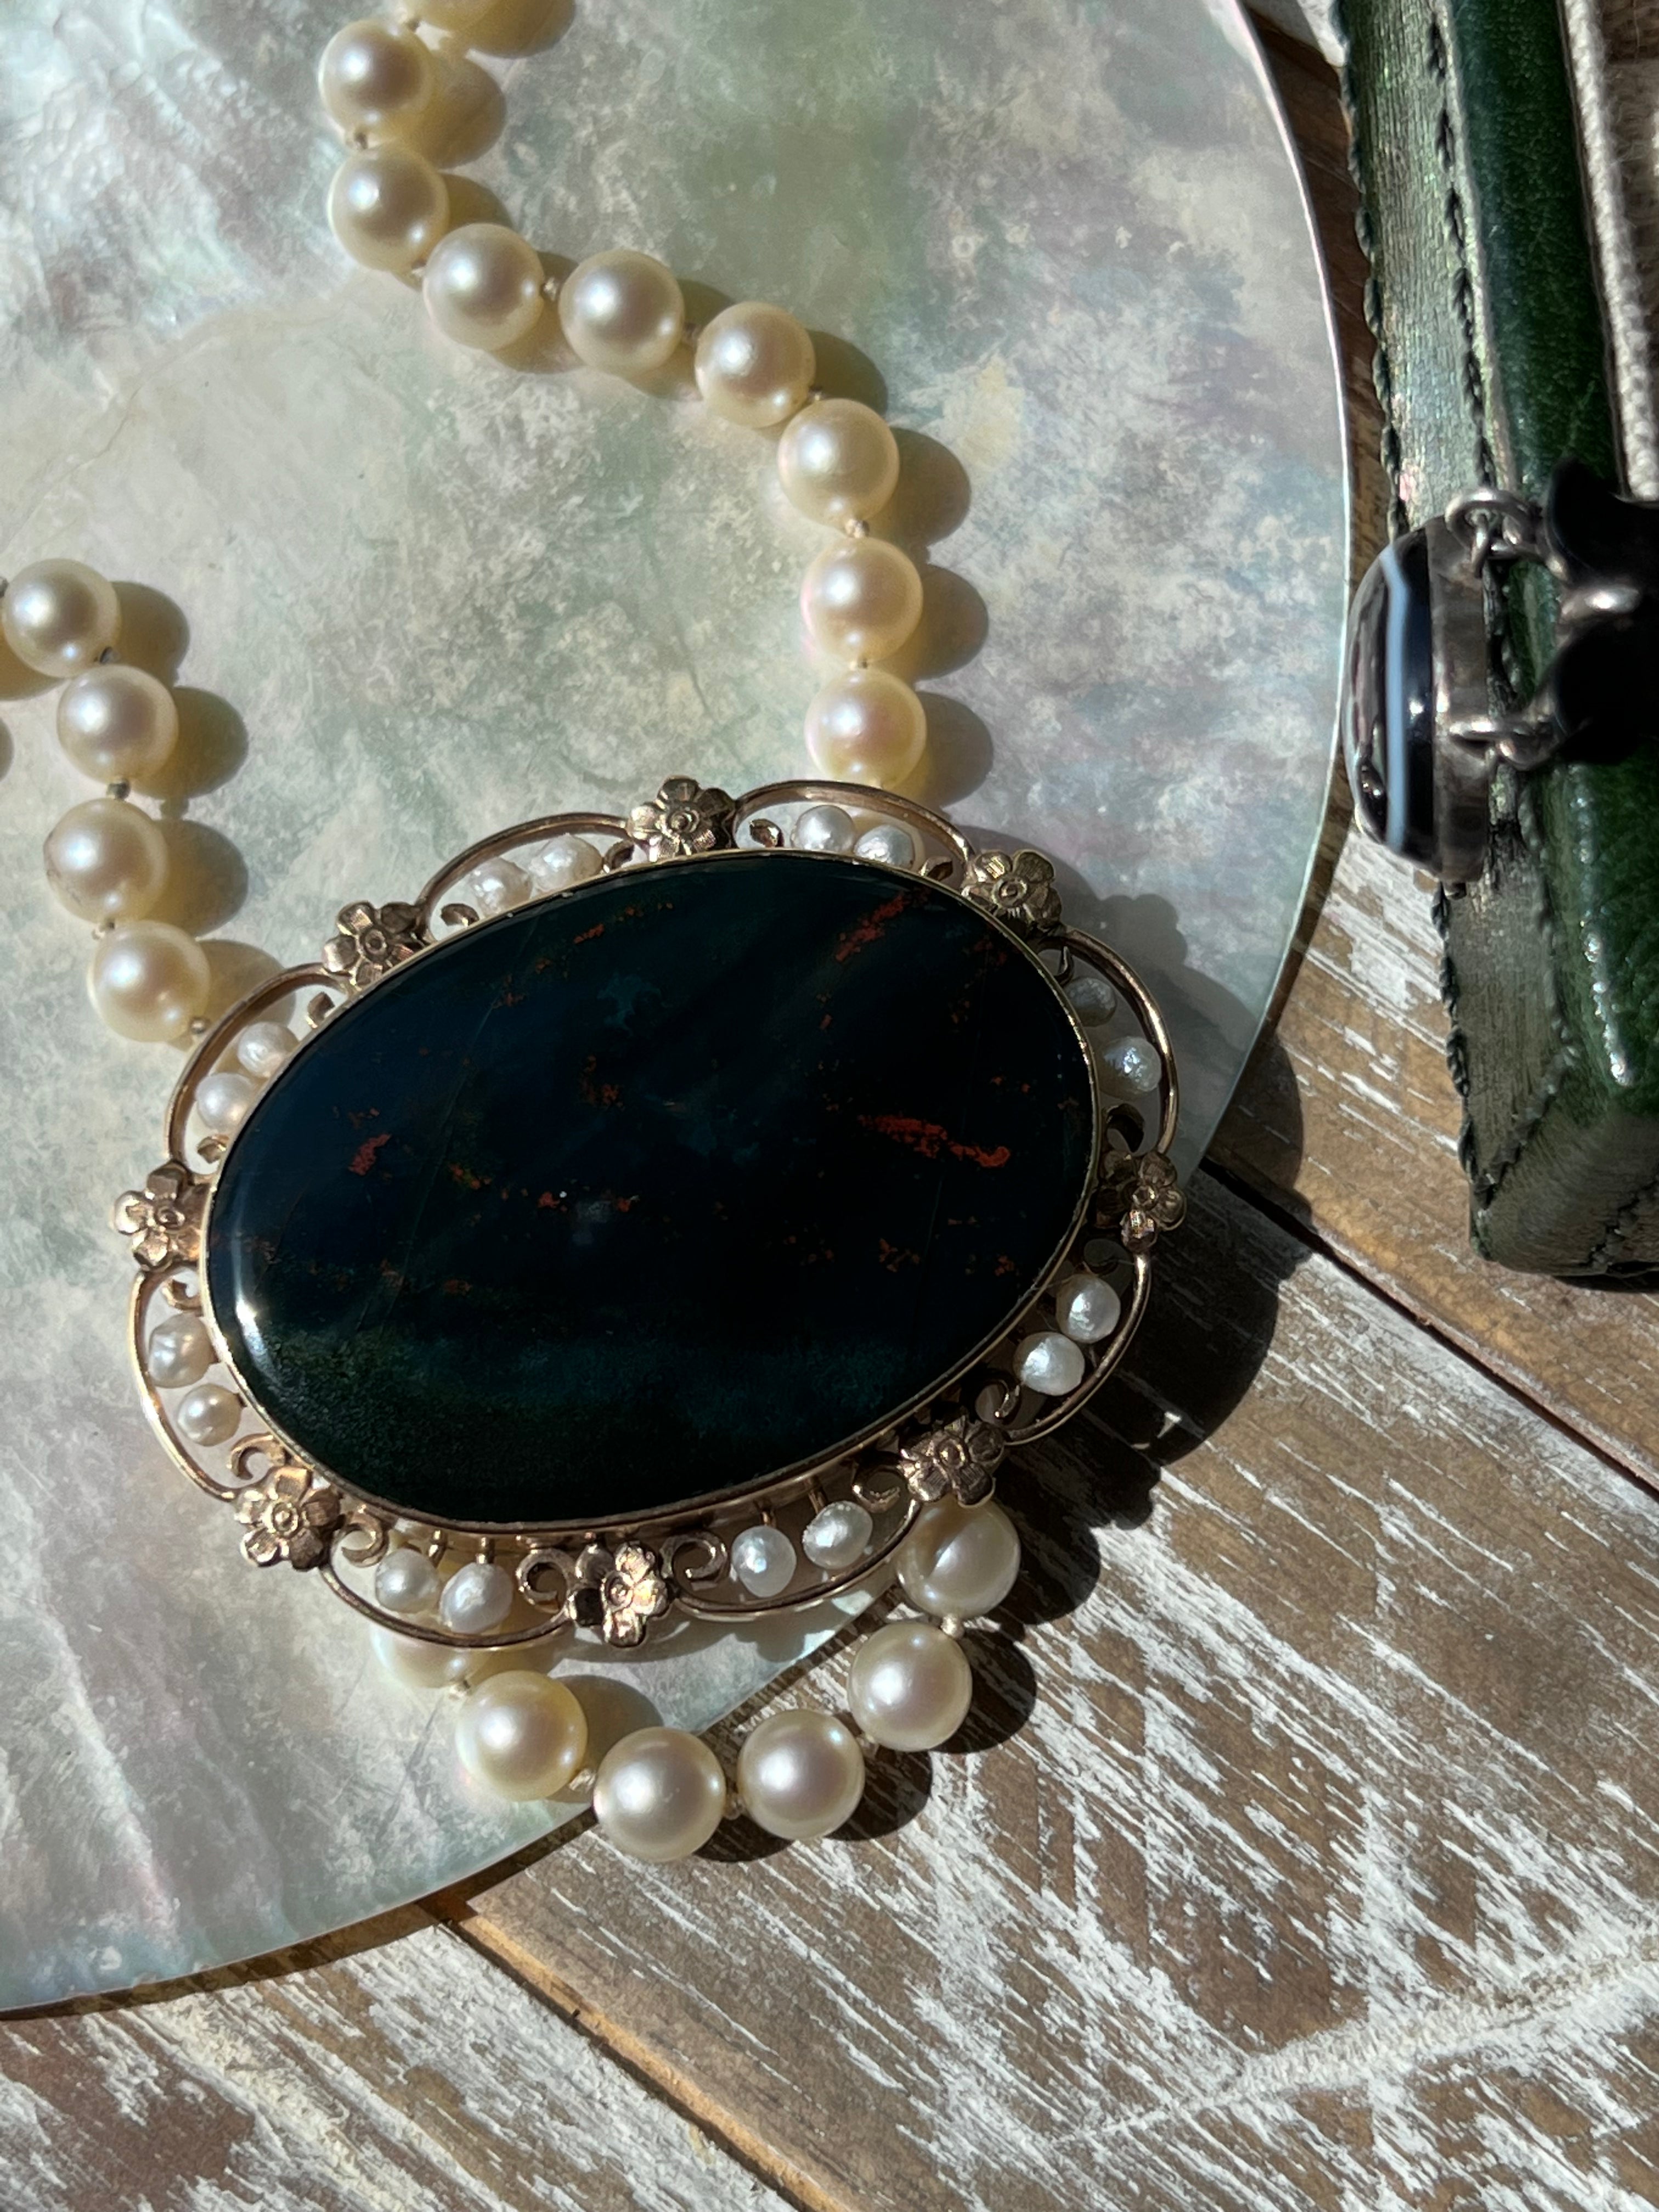 Rare Bloodstone Brooch with Pearls in 14ct